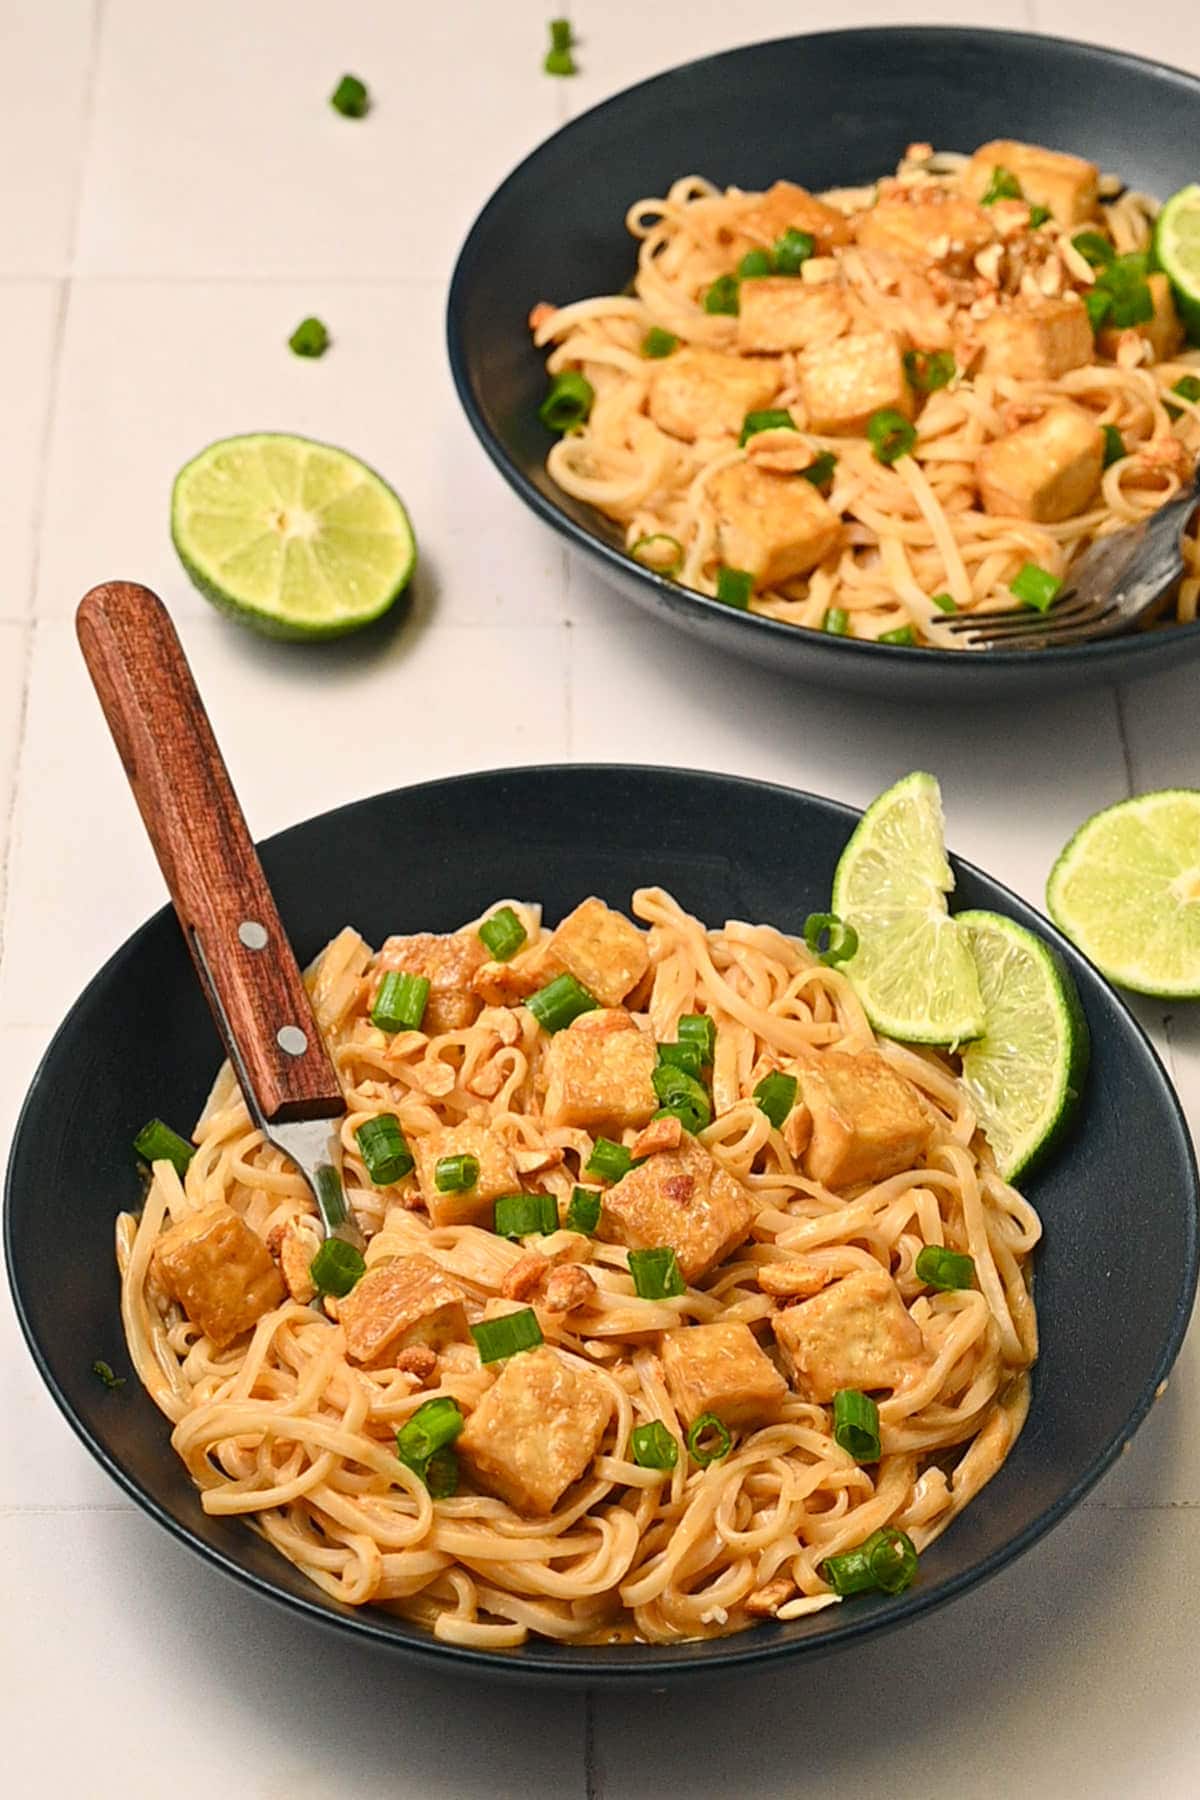 2 bowls of spicy peanut butter noodles garnished with scallions, chopped peanuts, and lime wedges.